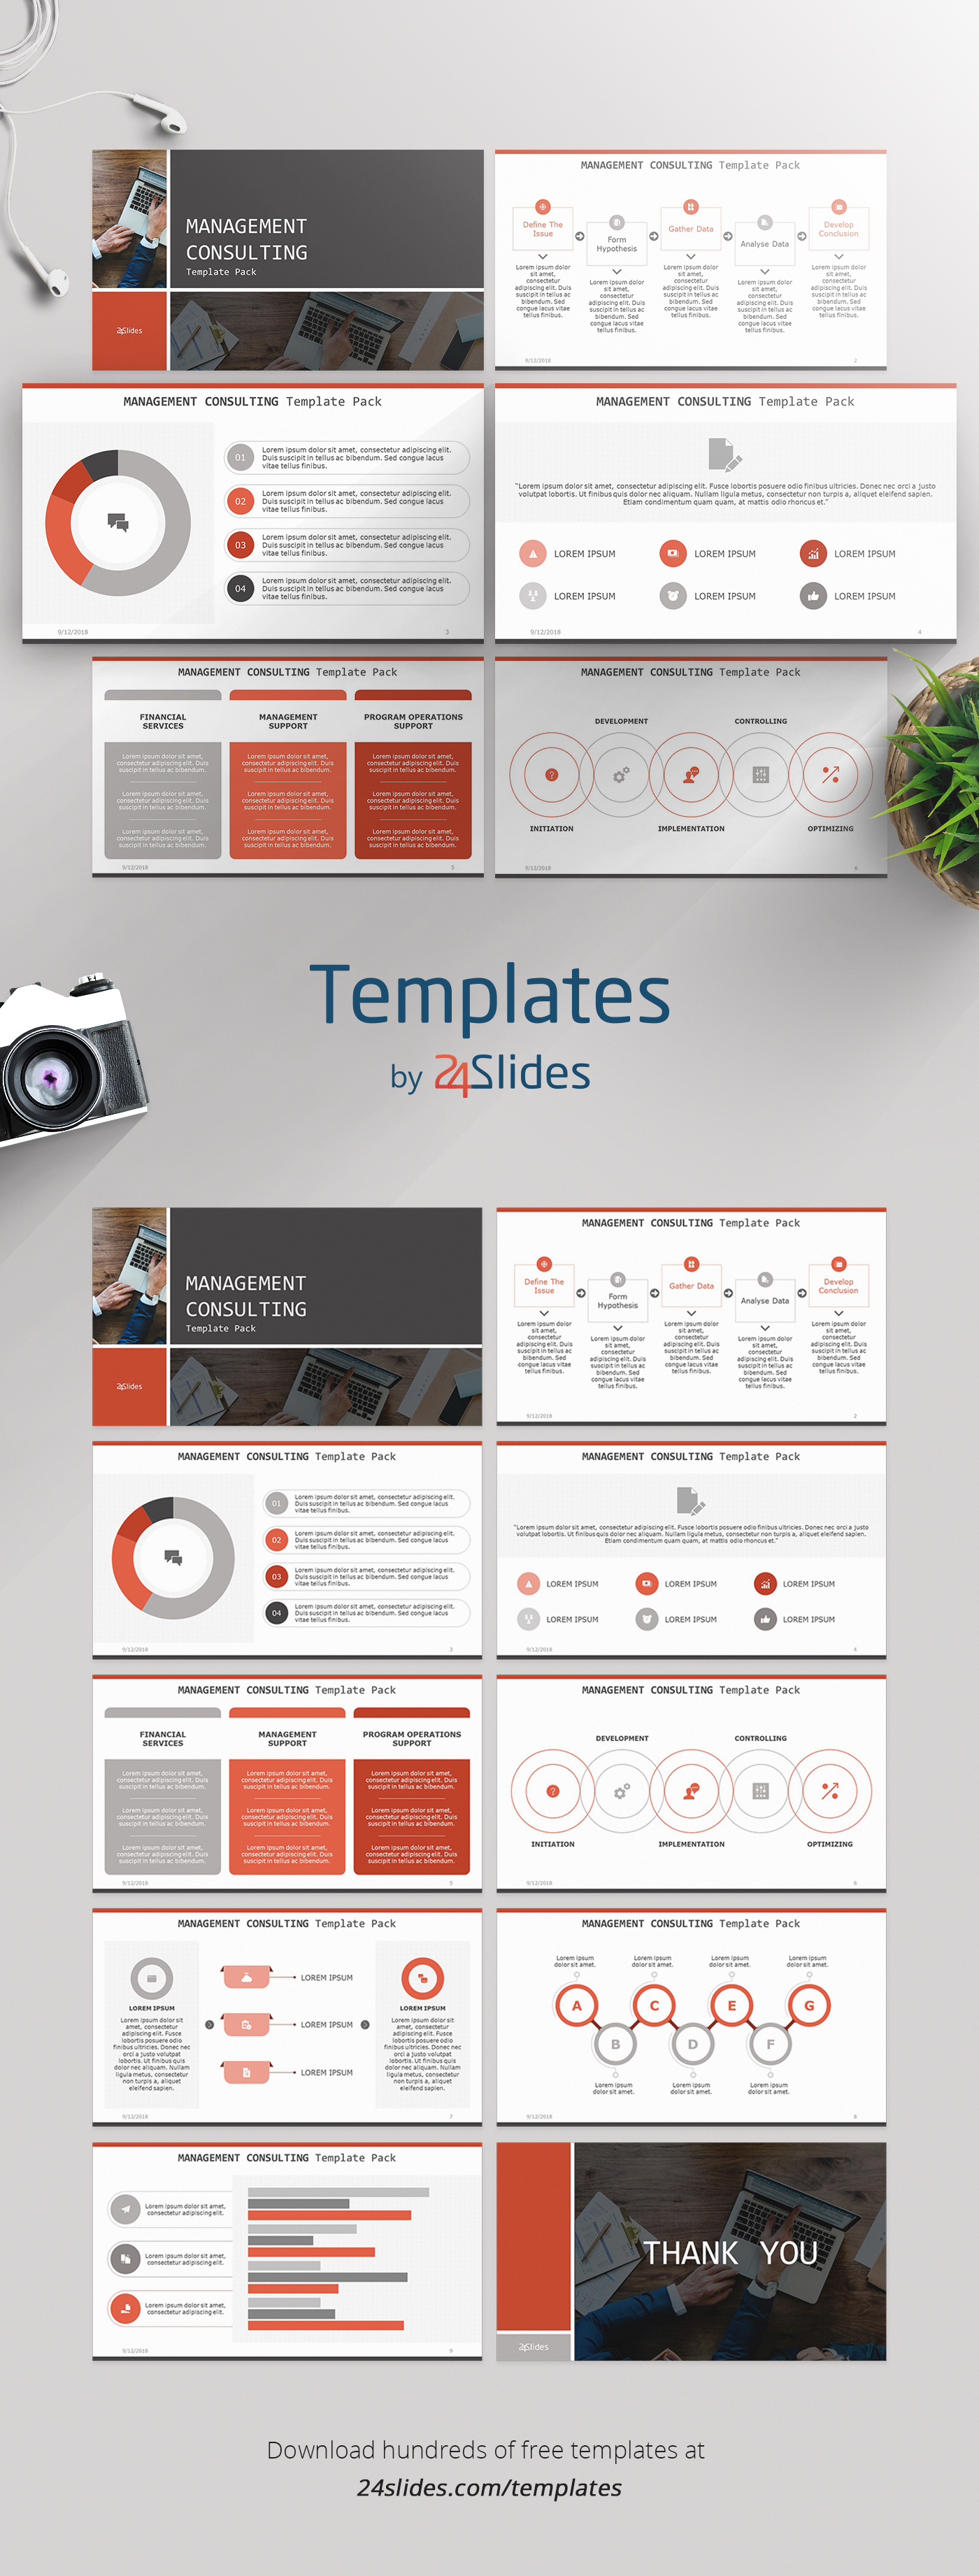 consulting presentation templates ppt free download